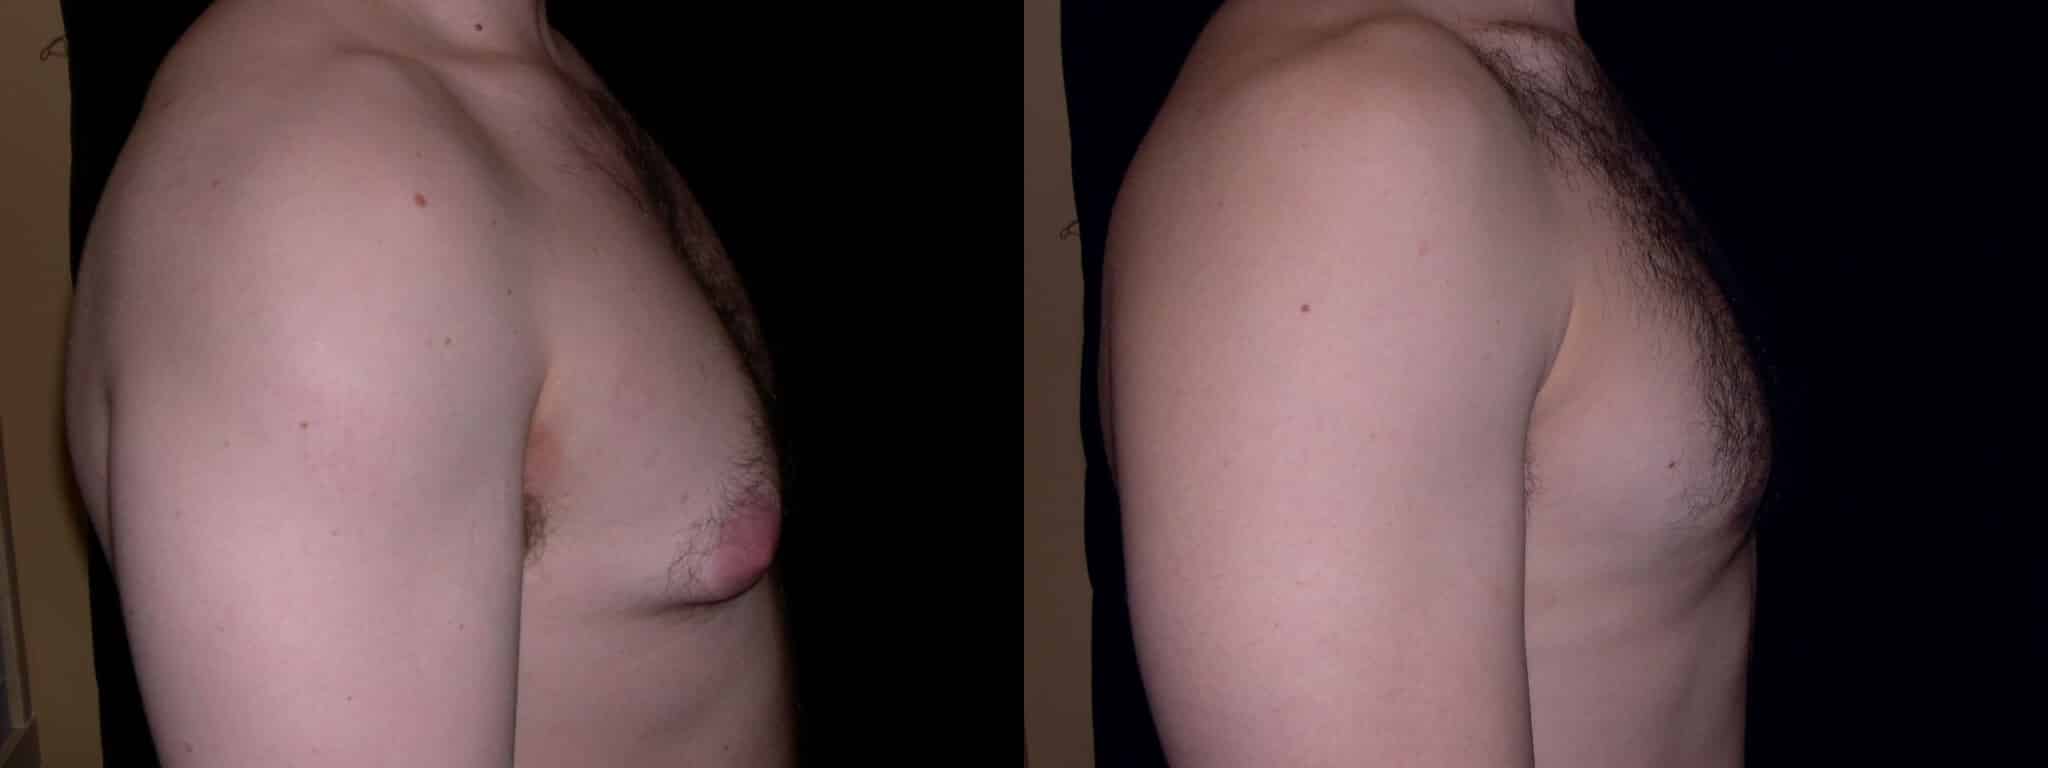 Gynecomastia Patient 4 Before & After Details